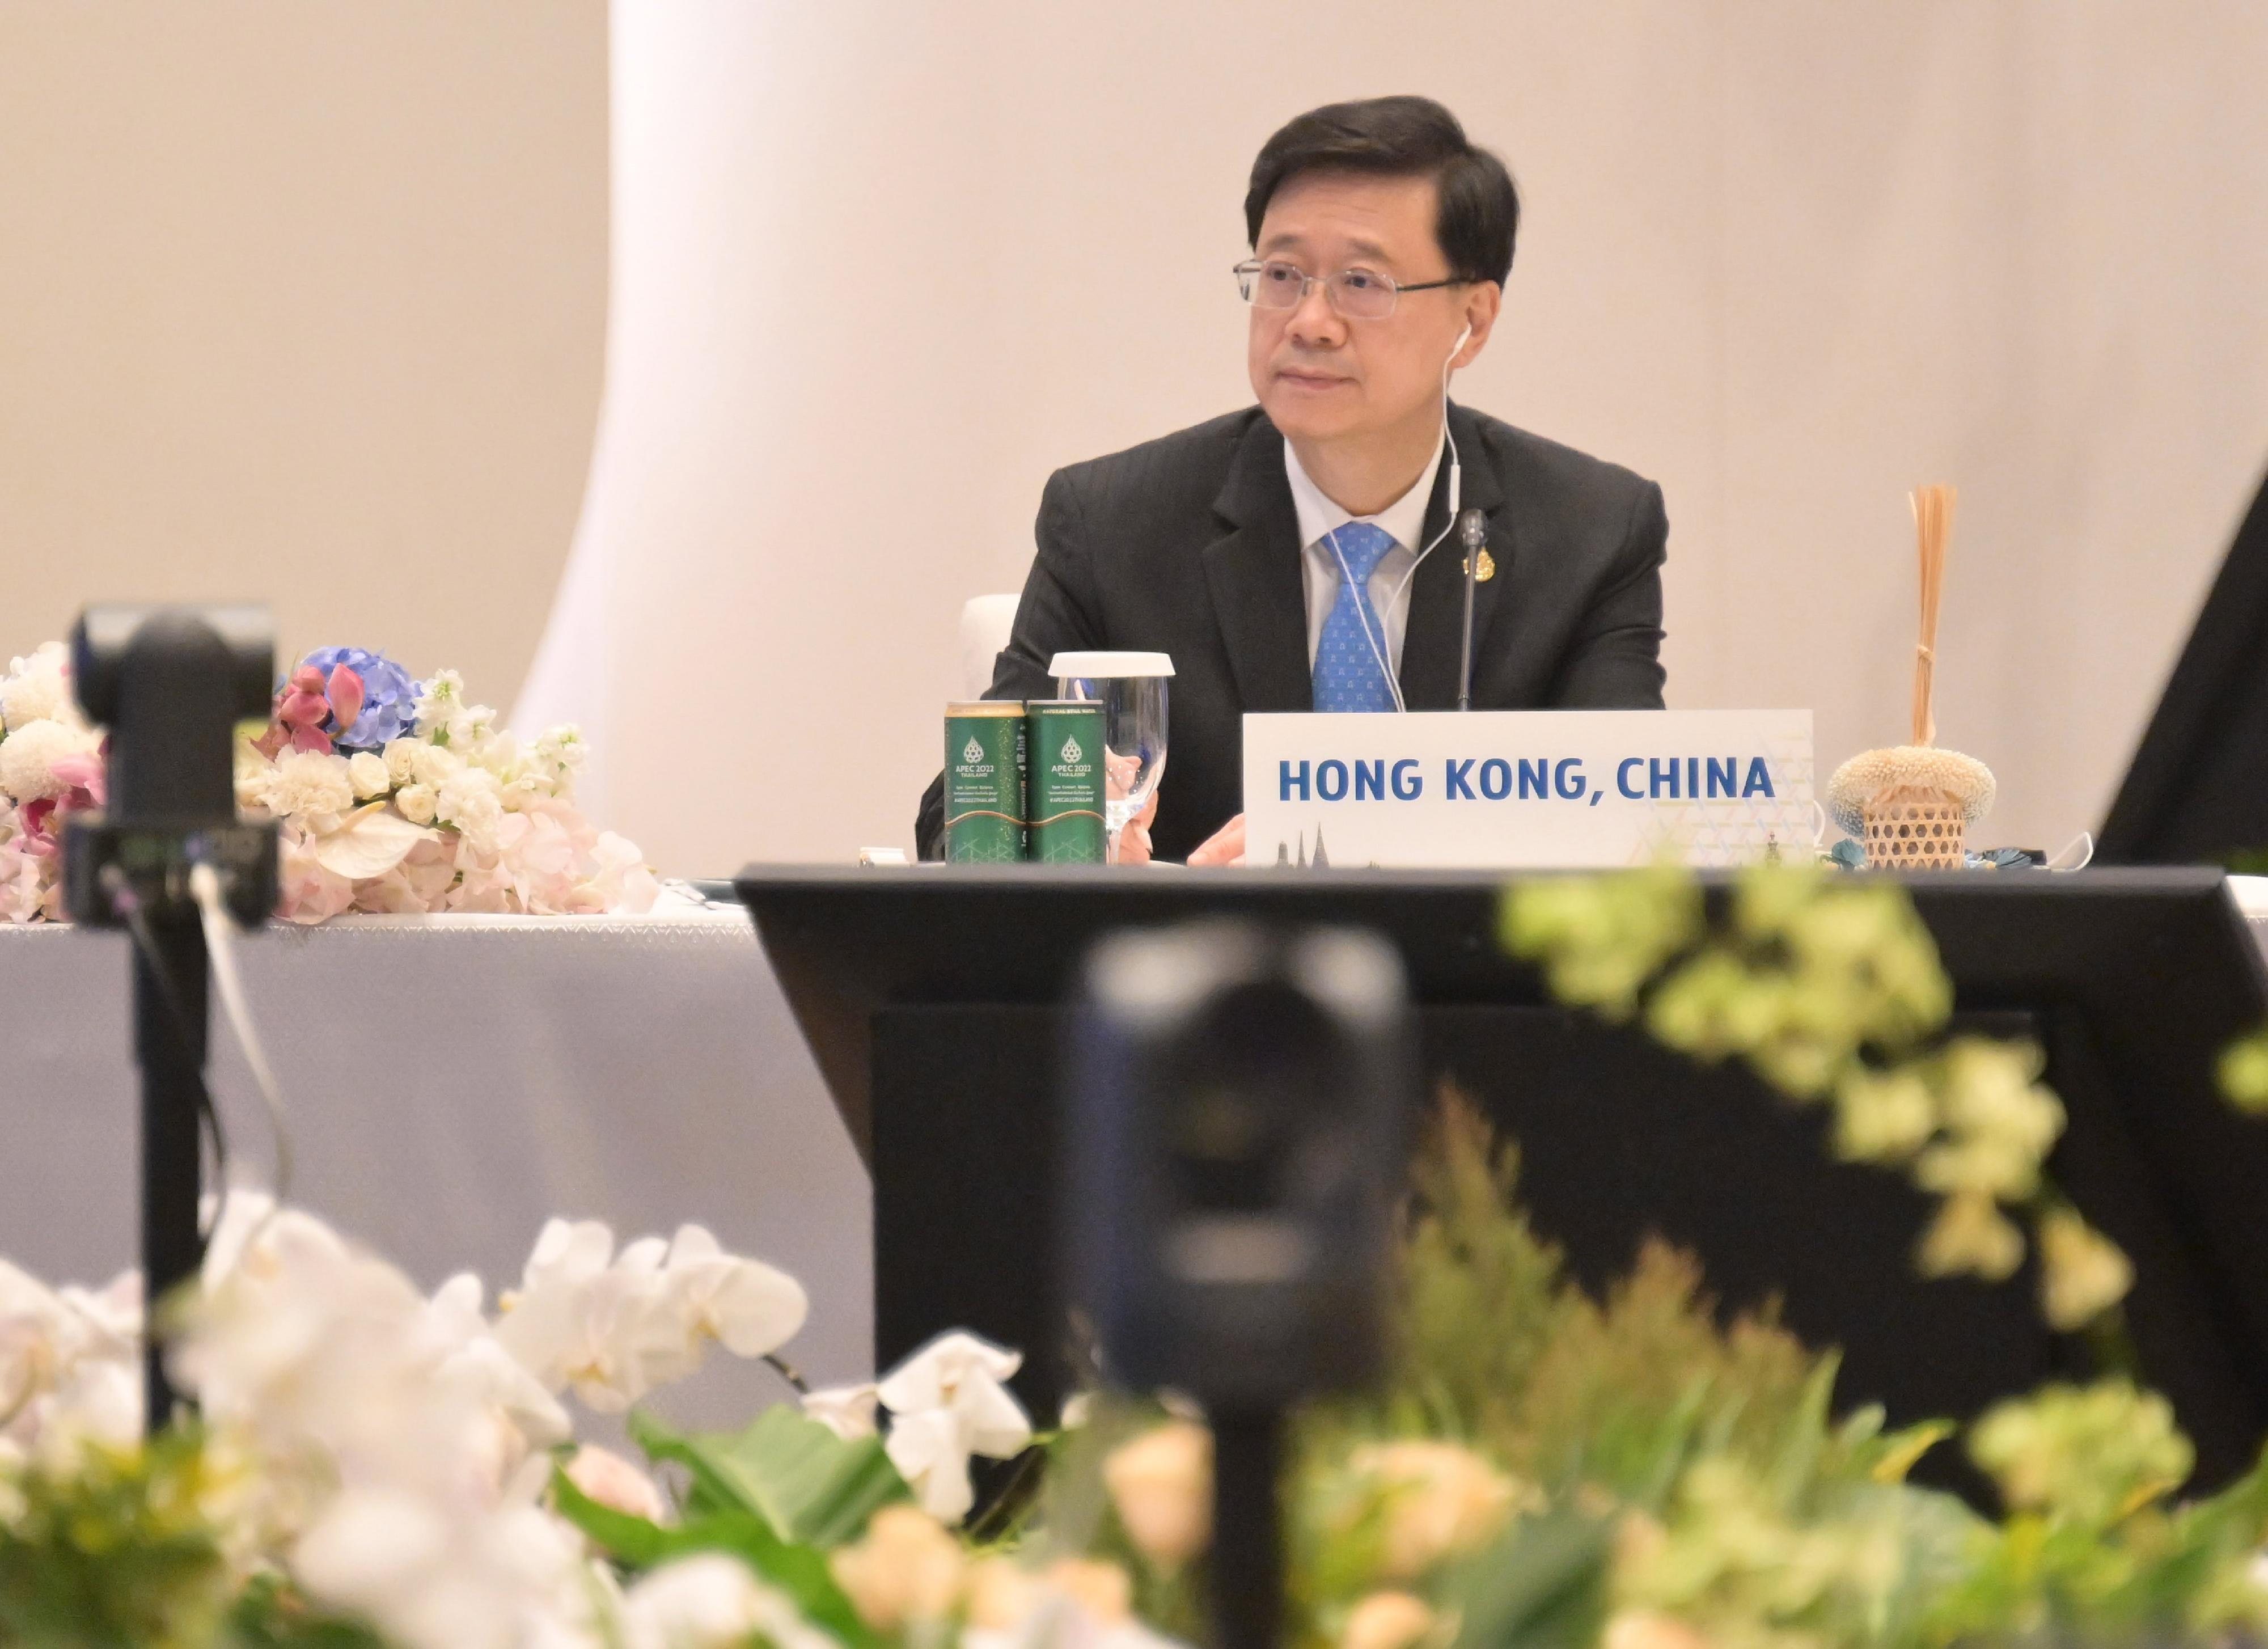 The Chief Executive, Mr John Lee, attends the second session of the 29th Asia-Pacific Economic Cooperation Economic Leaders' Meeting in Bangkok, Thailand, today (November 19).